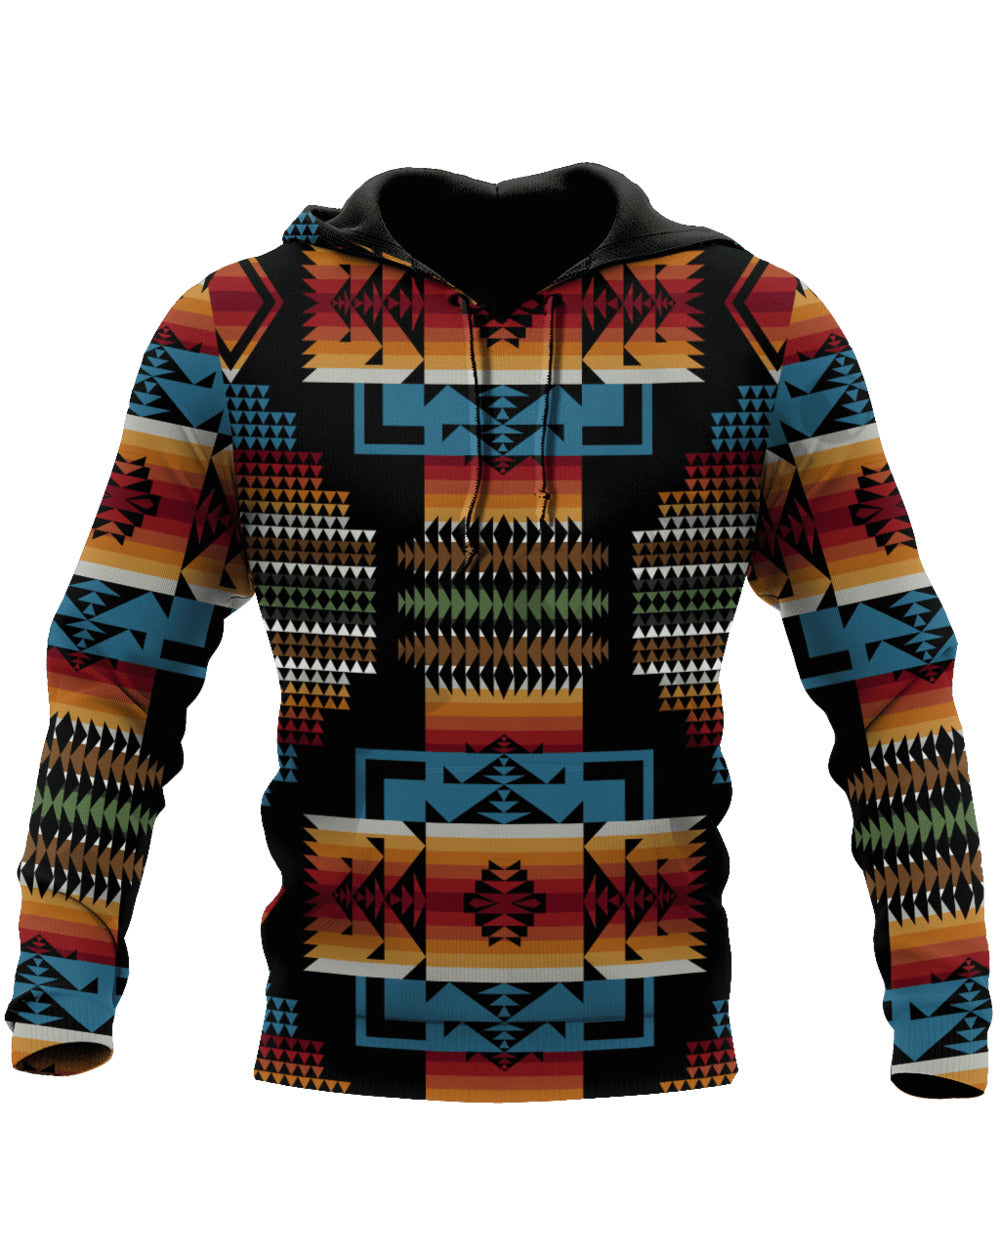 Native Pattern Culture Native American 3D All Over Print Hoodie and Zip Hoodie